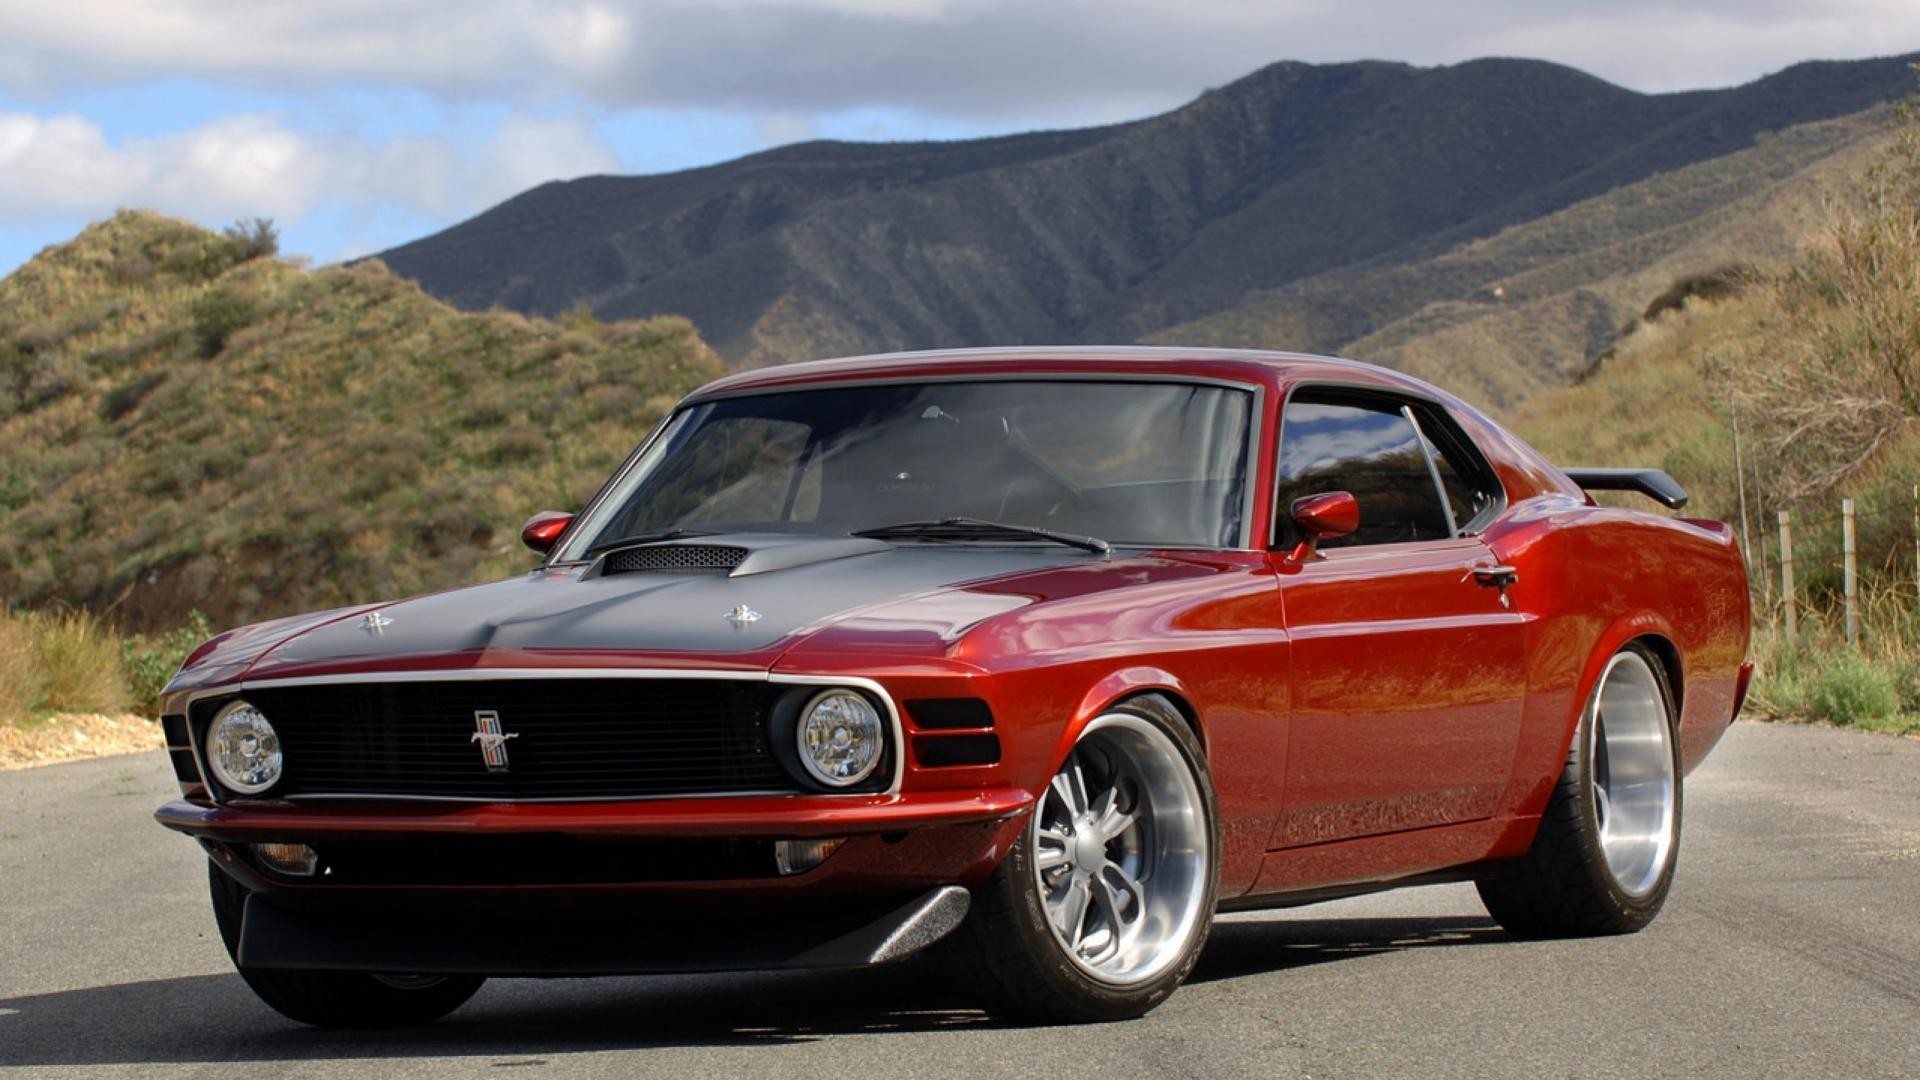 General 1920x1080 car Ford Mustang red cars vehicle Ford muscle cars American cars